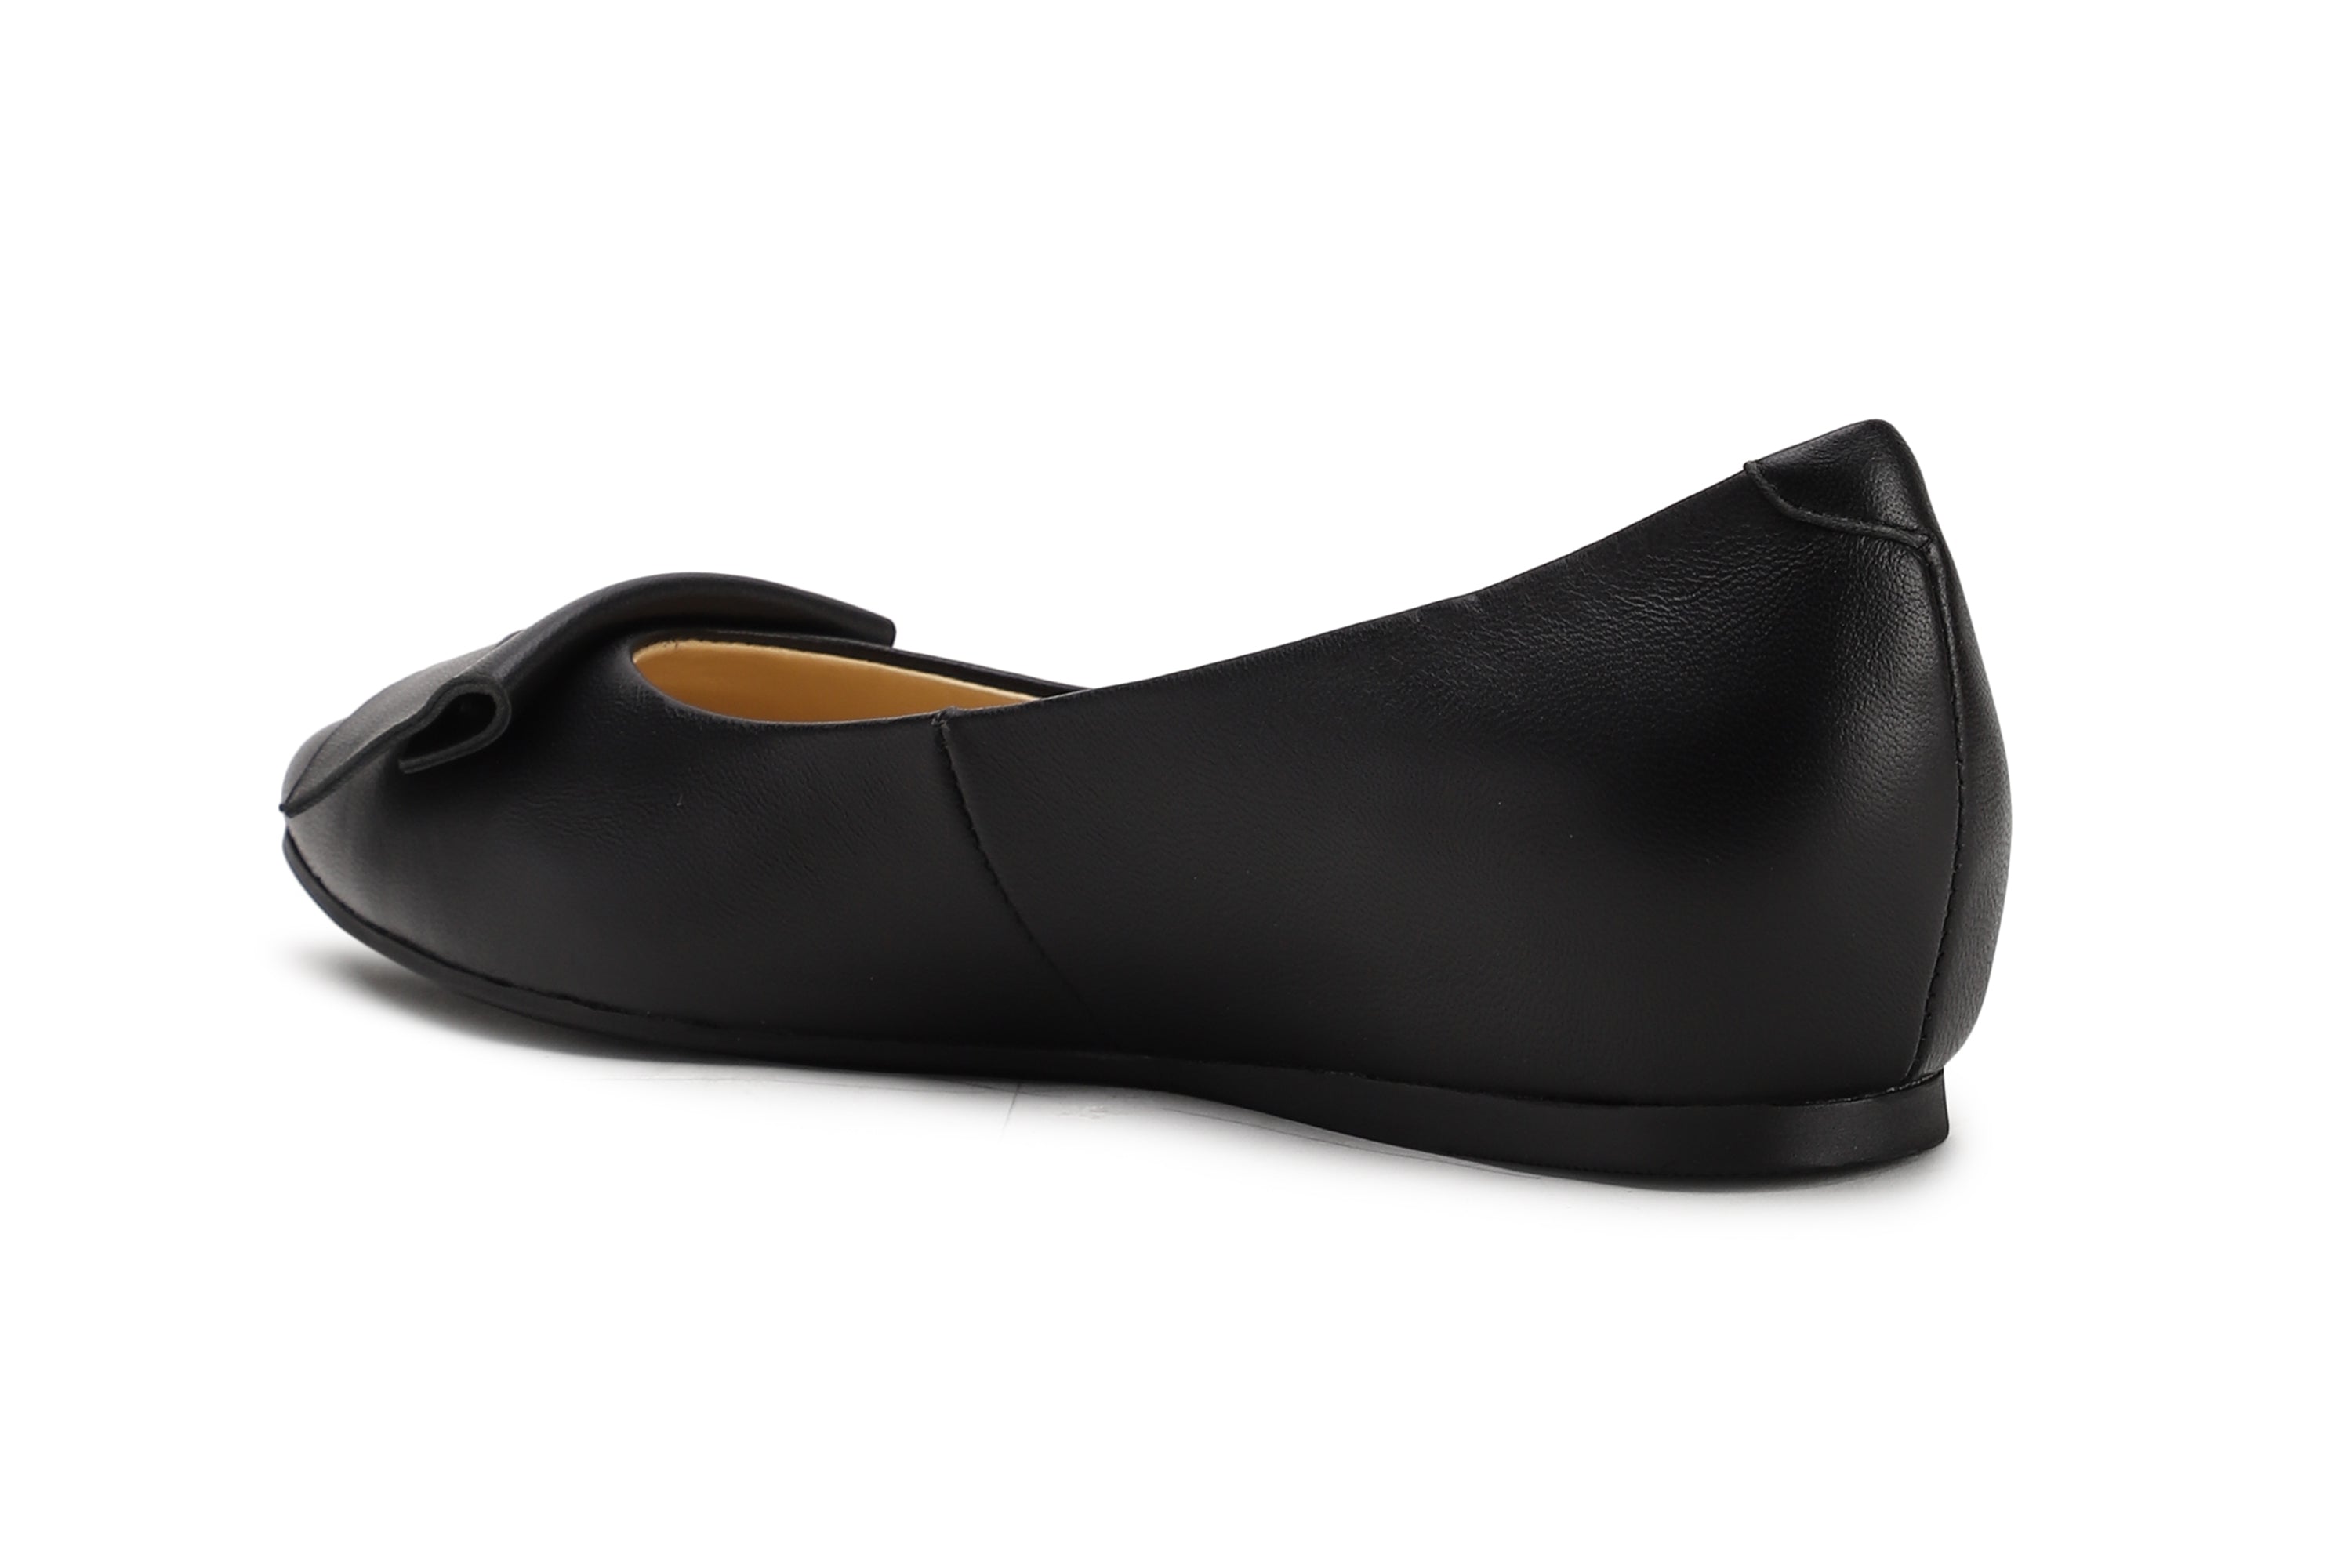 LEATHER BALLET FLATS